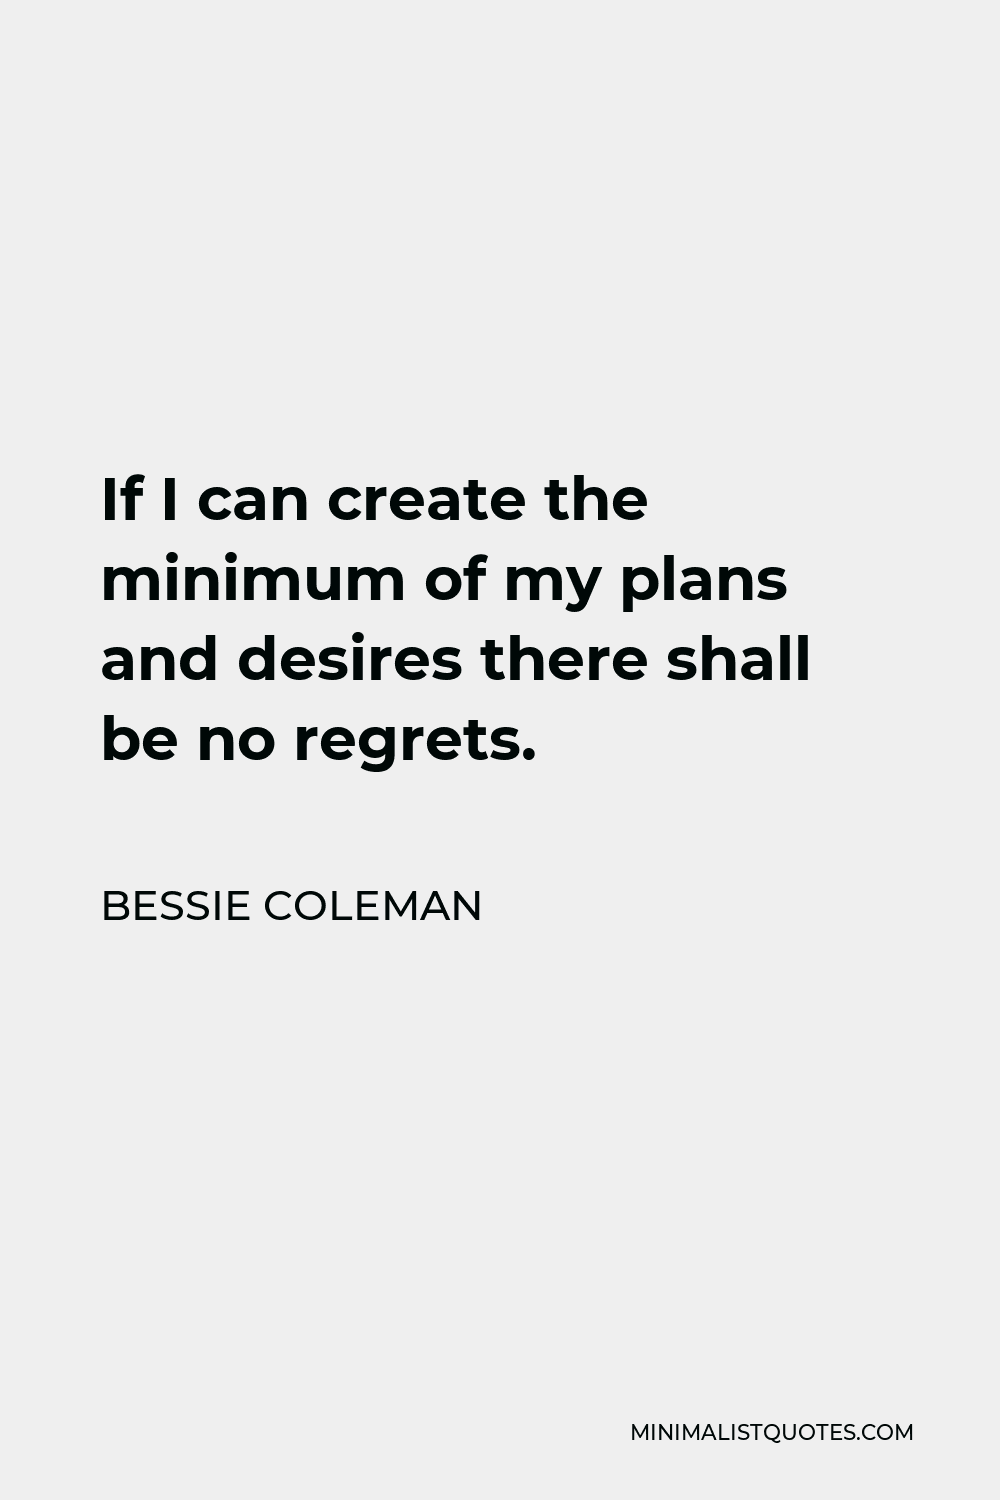 Bessie Coleman Quote - If I can create the minimum of my plans and desires there shall be no regrets.